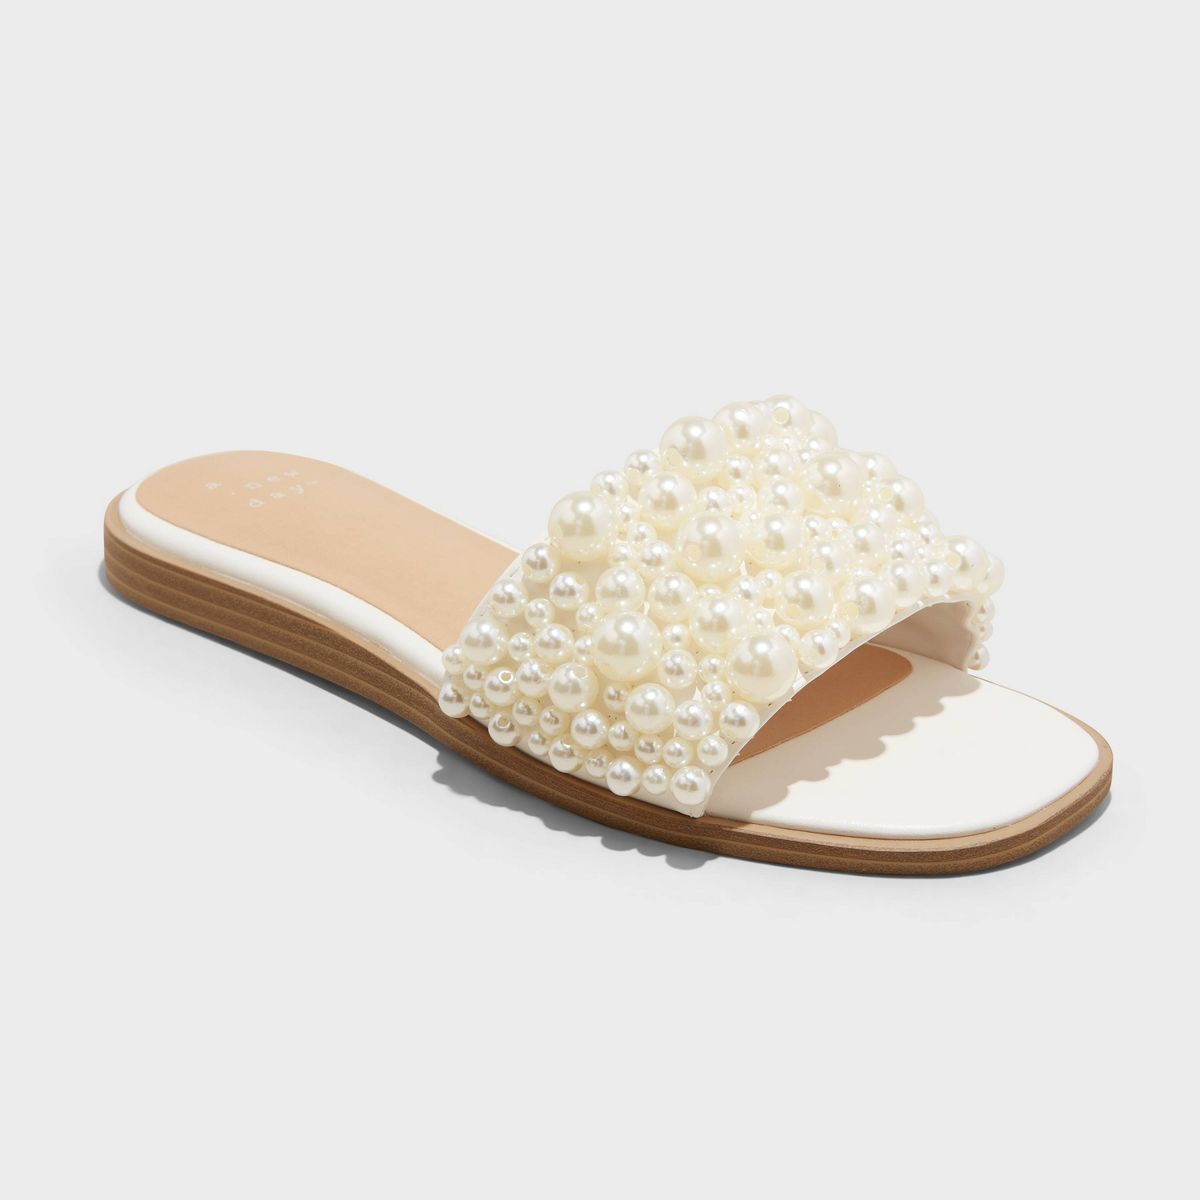 Women's Jasmine Pearl Slide Sandals with Memory Foam Insole - A New Day™ Cream 6 | Target